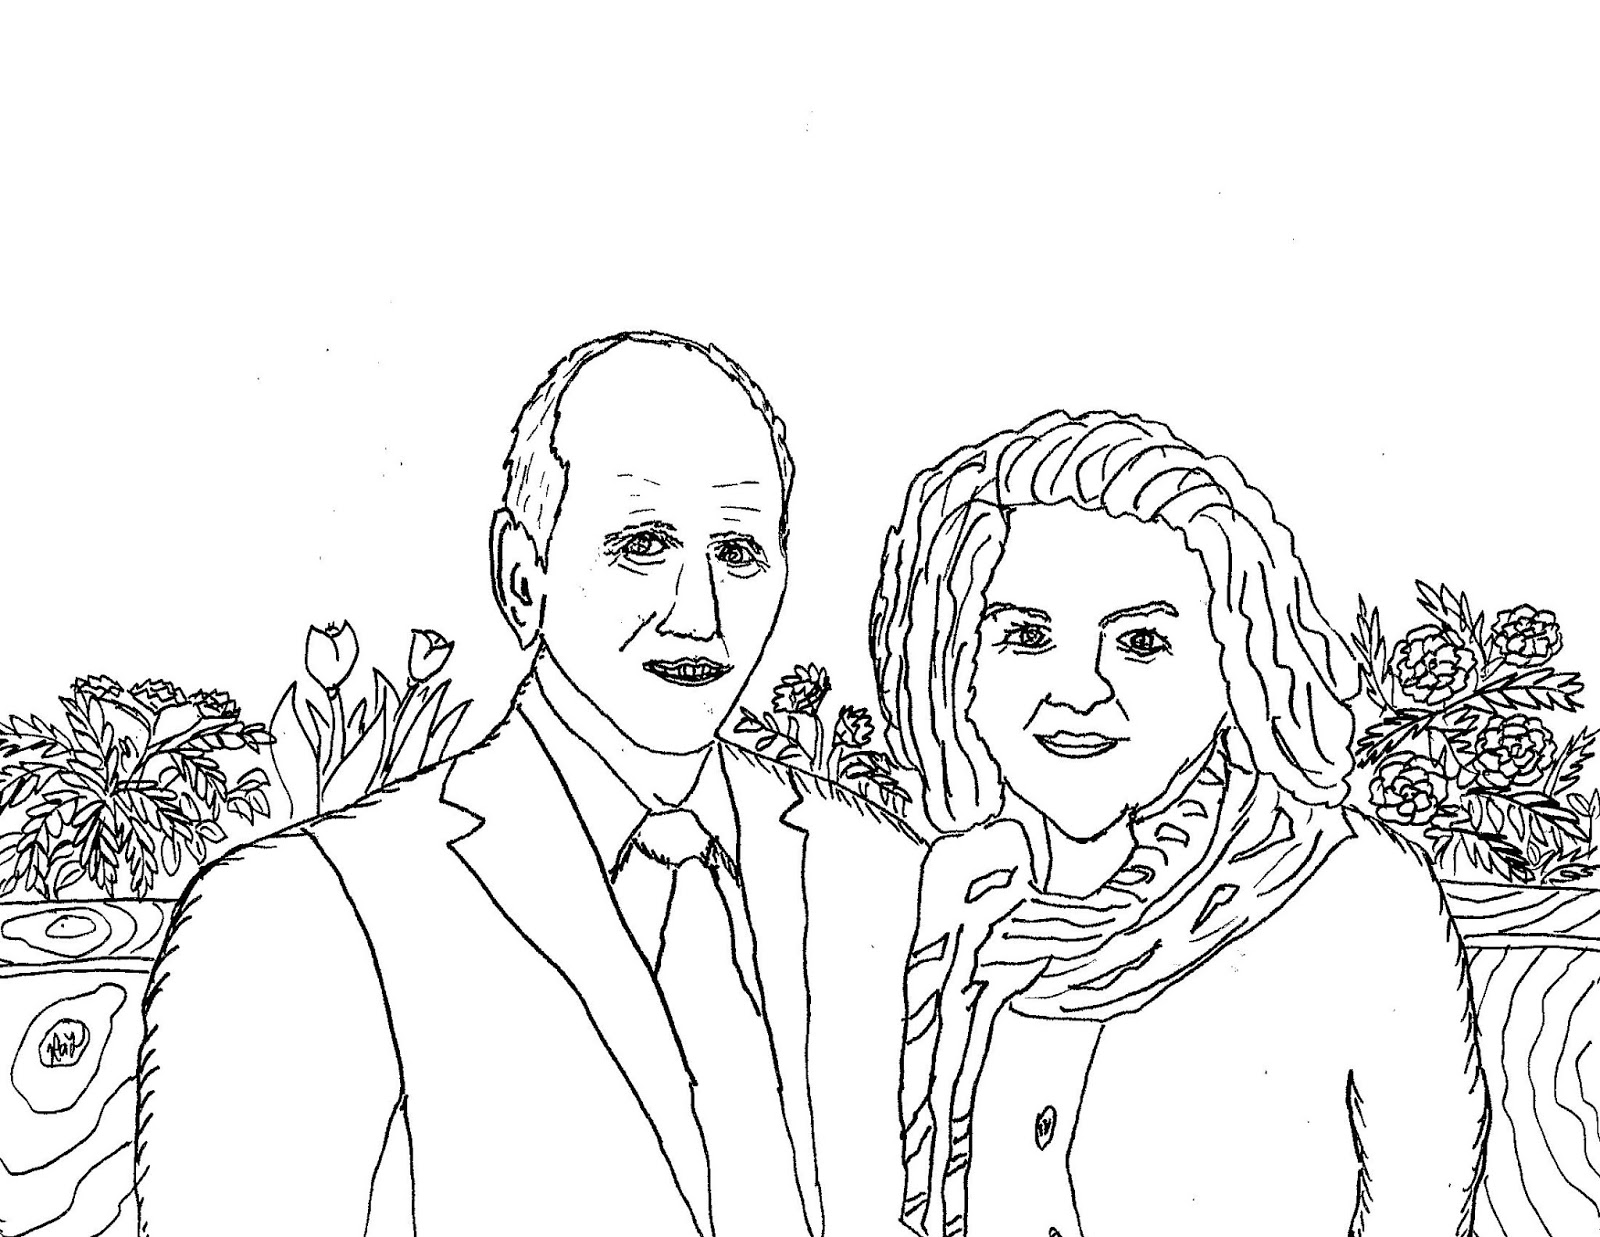 Robin's Great Coloring Pages: President and Sister Nelson